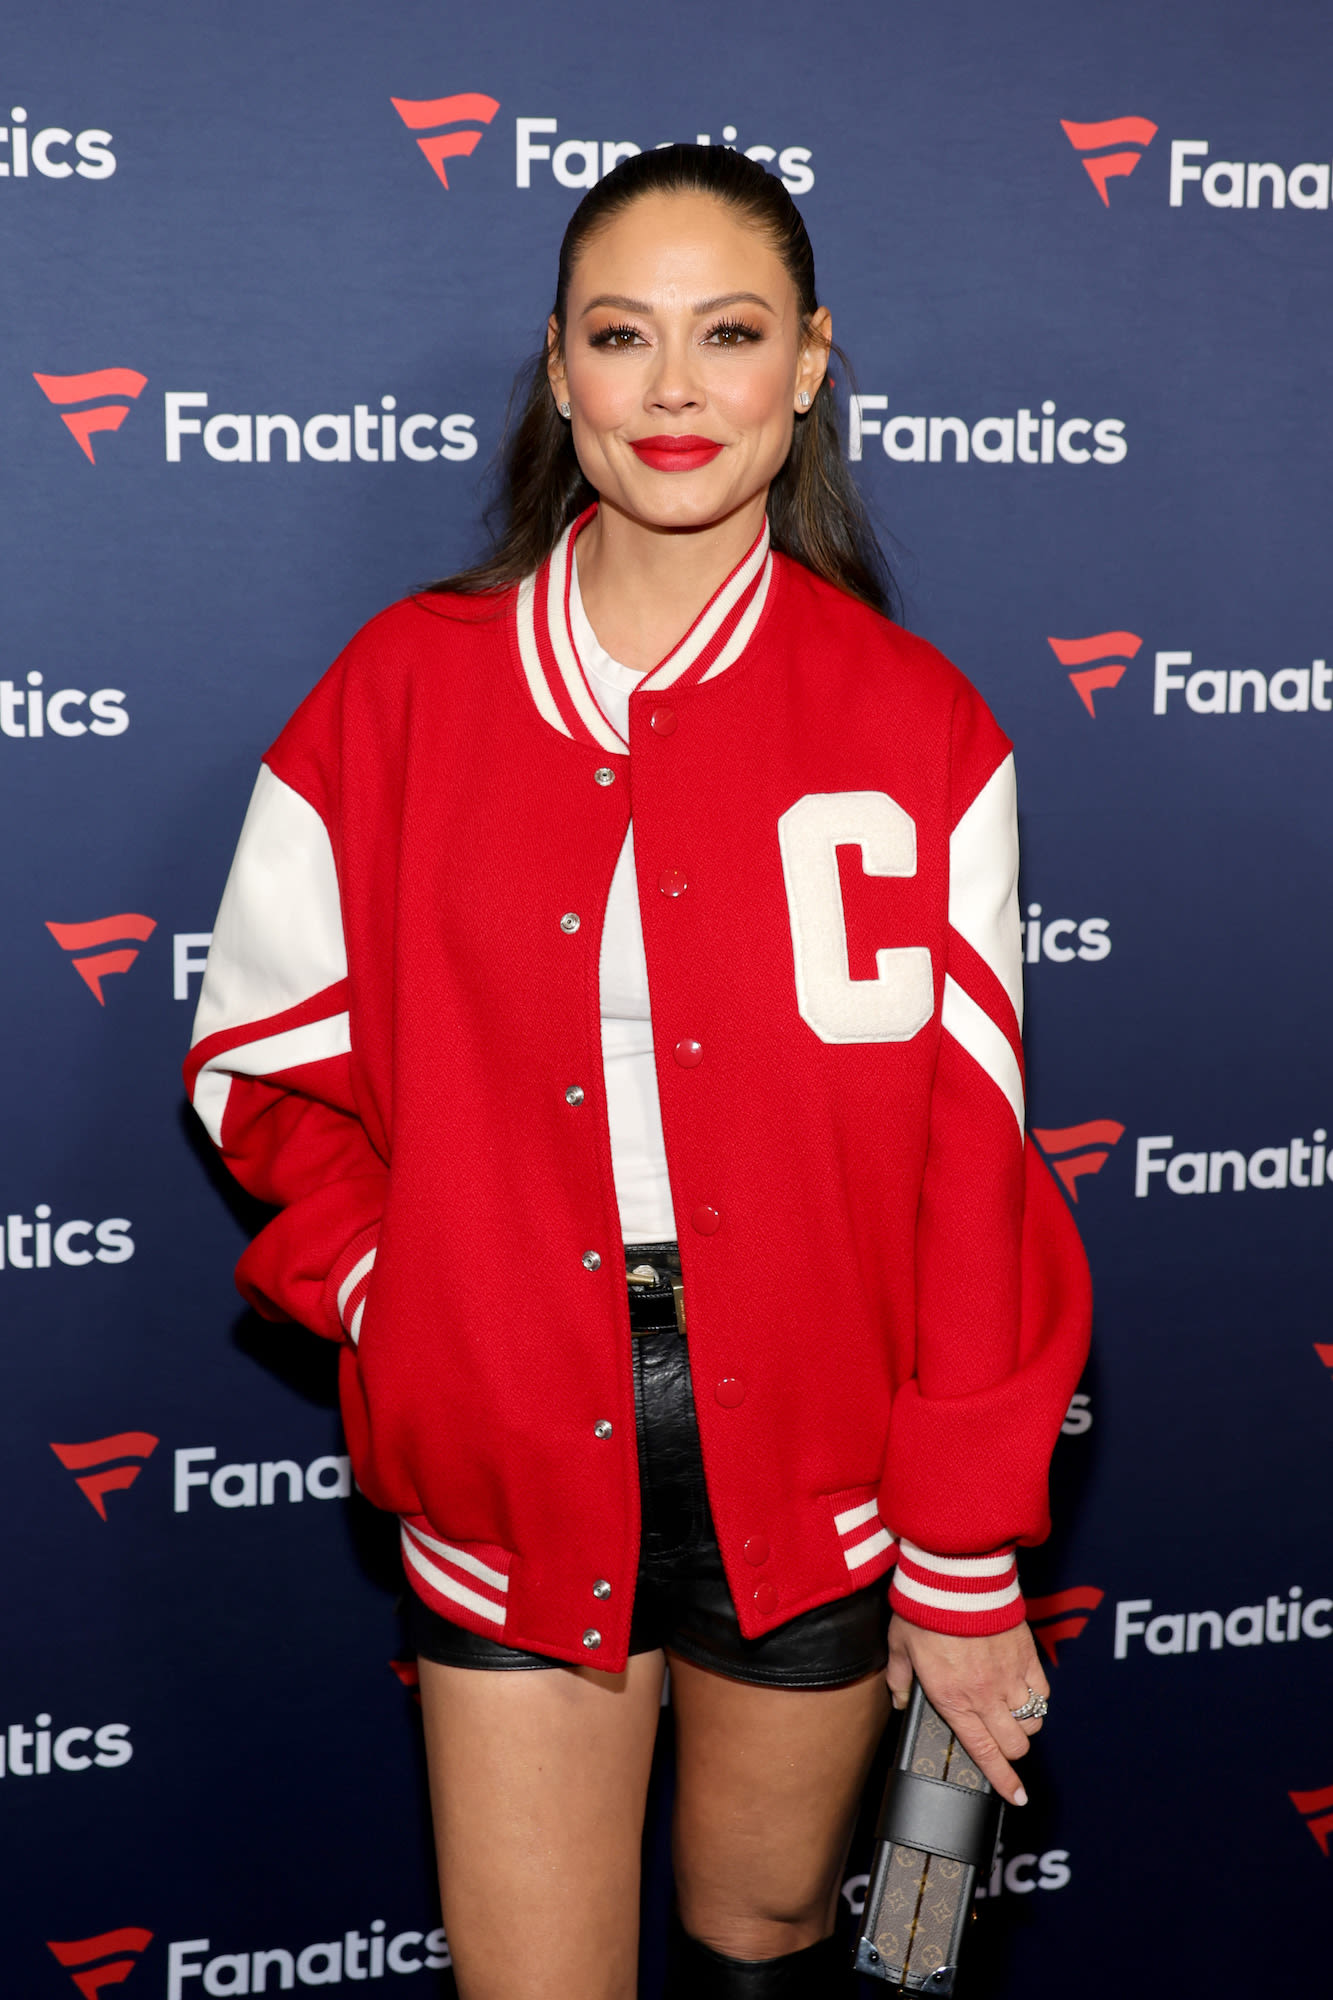 Vanessa Lachey Shares Stats of Now-Canceled NCIS: Hawai’i’s High-Viewership Ahead of Series Finale